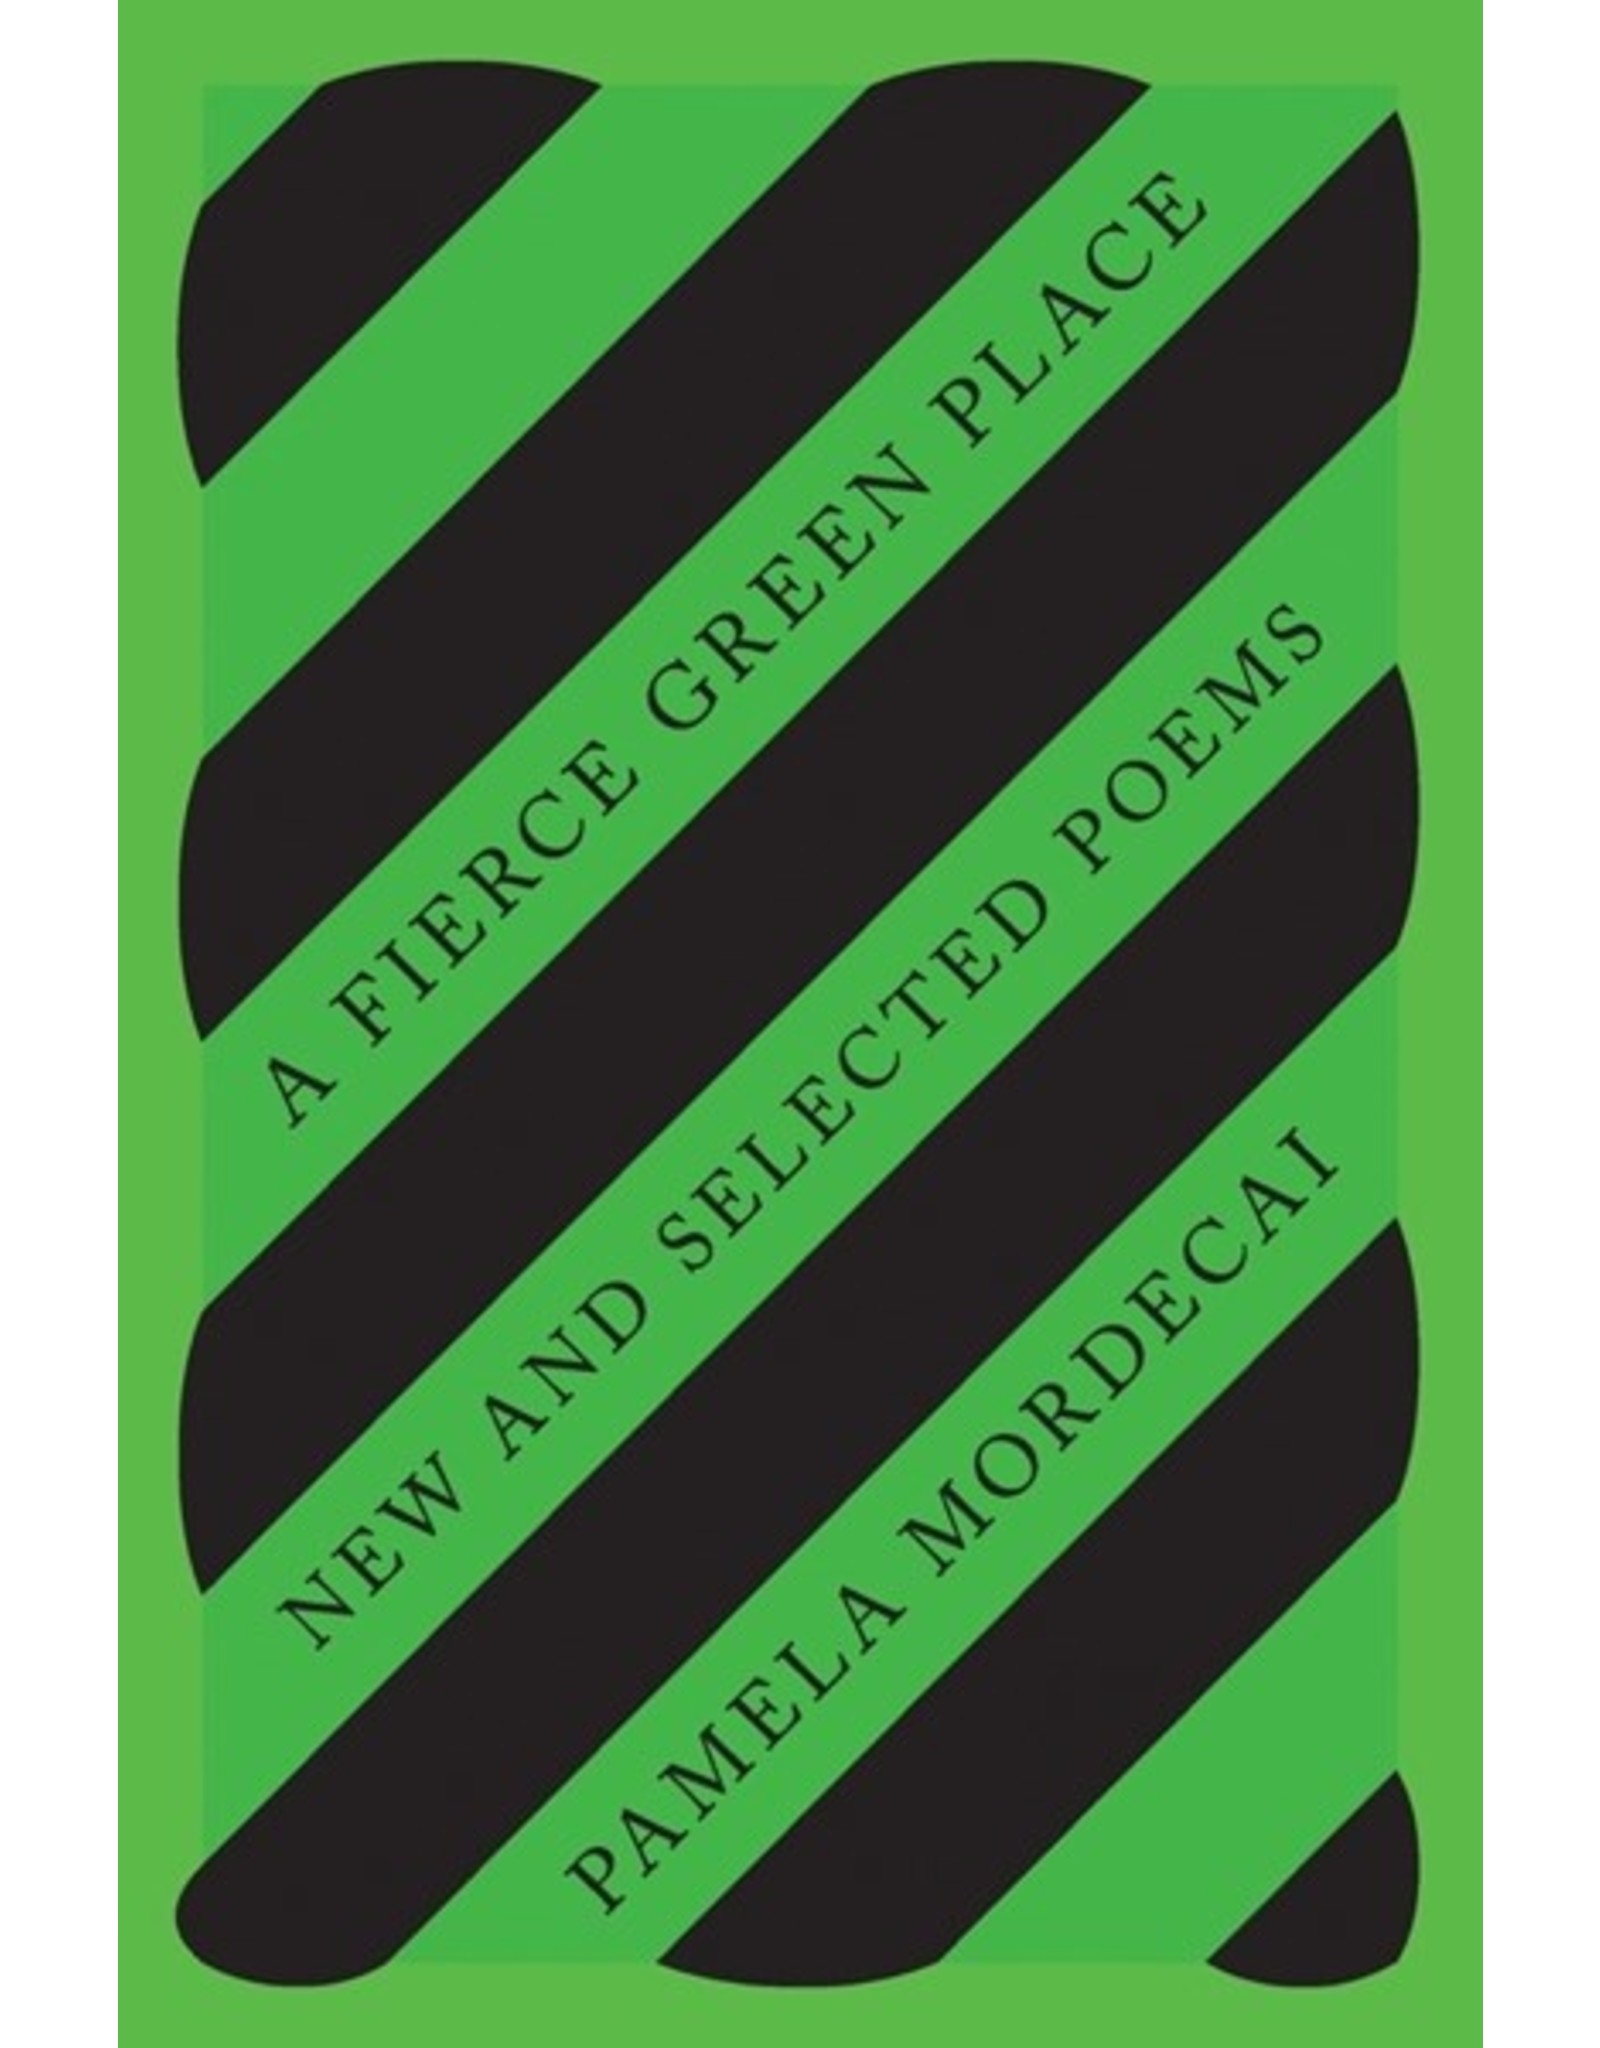 Books A Fierce Green Place : New and Selected Poems by Pamela Mordecai